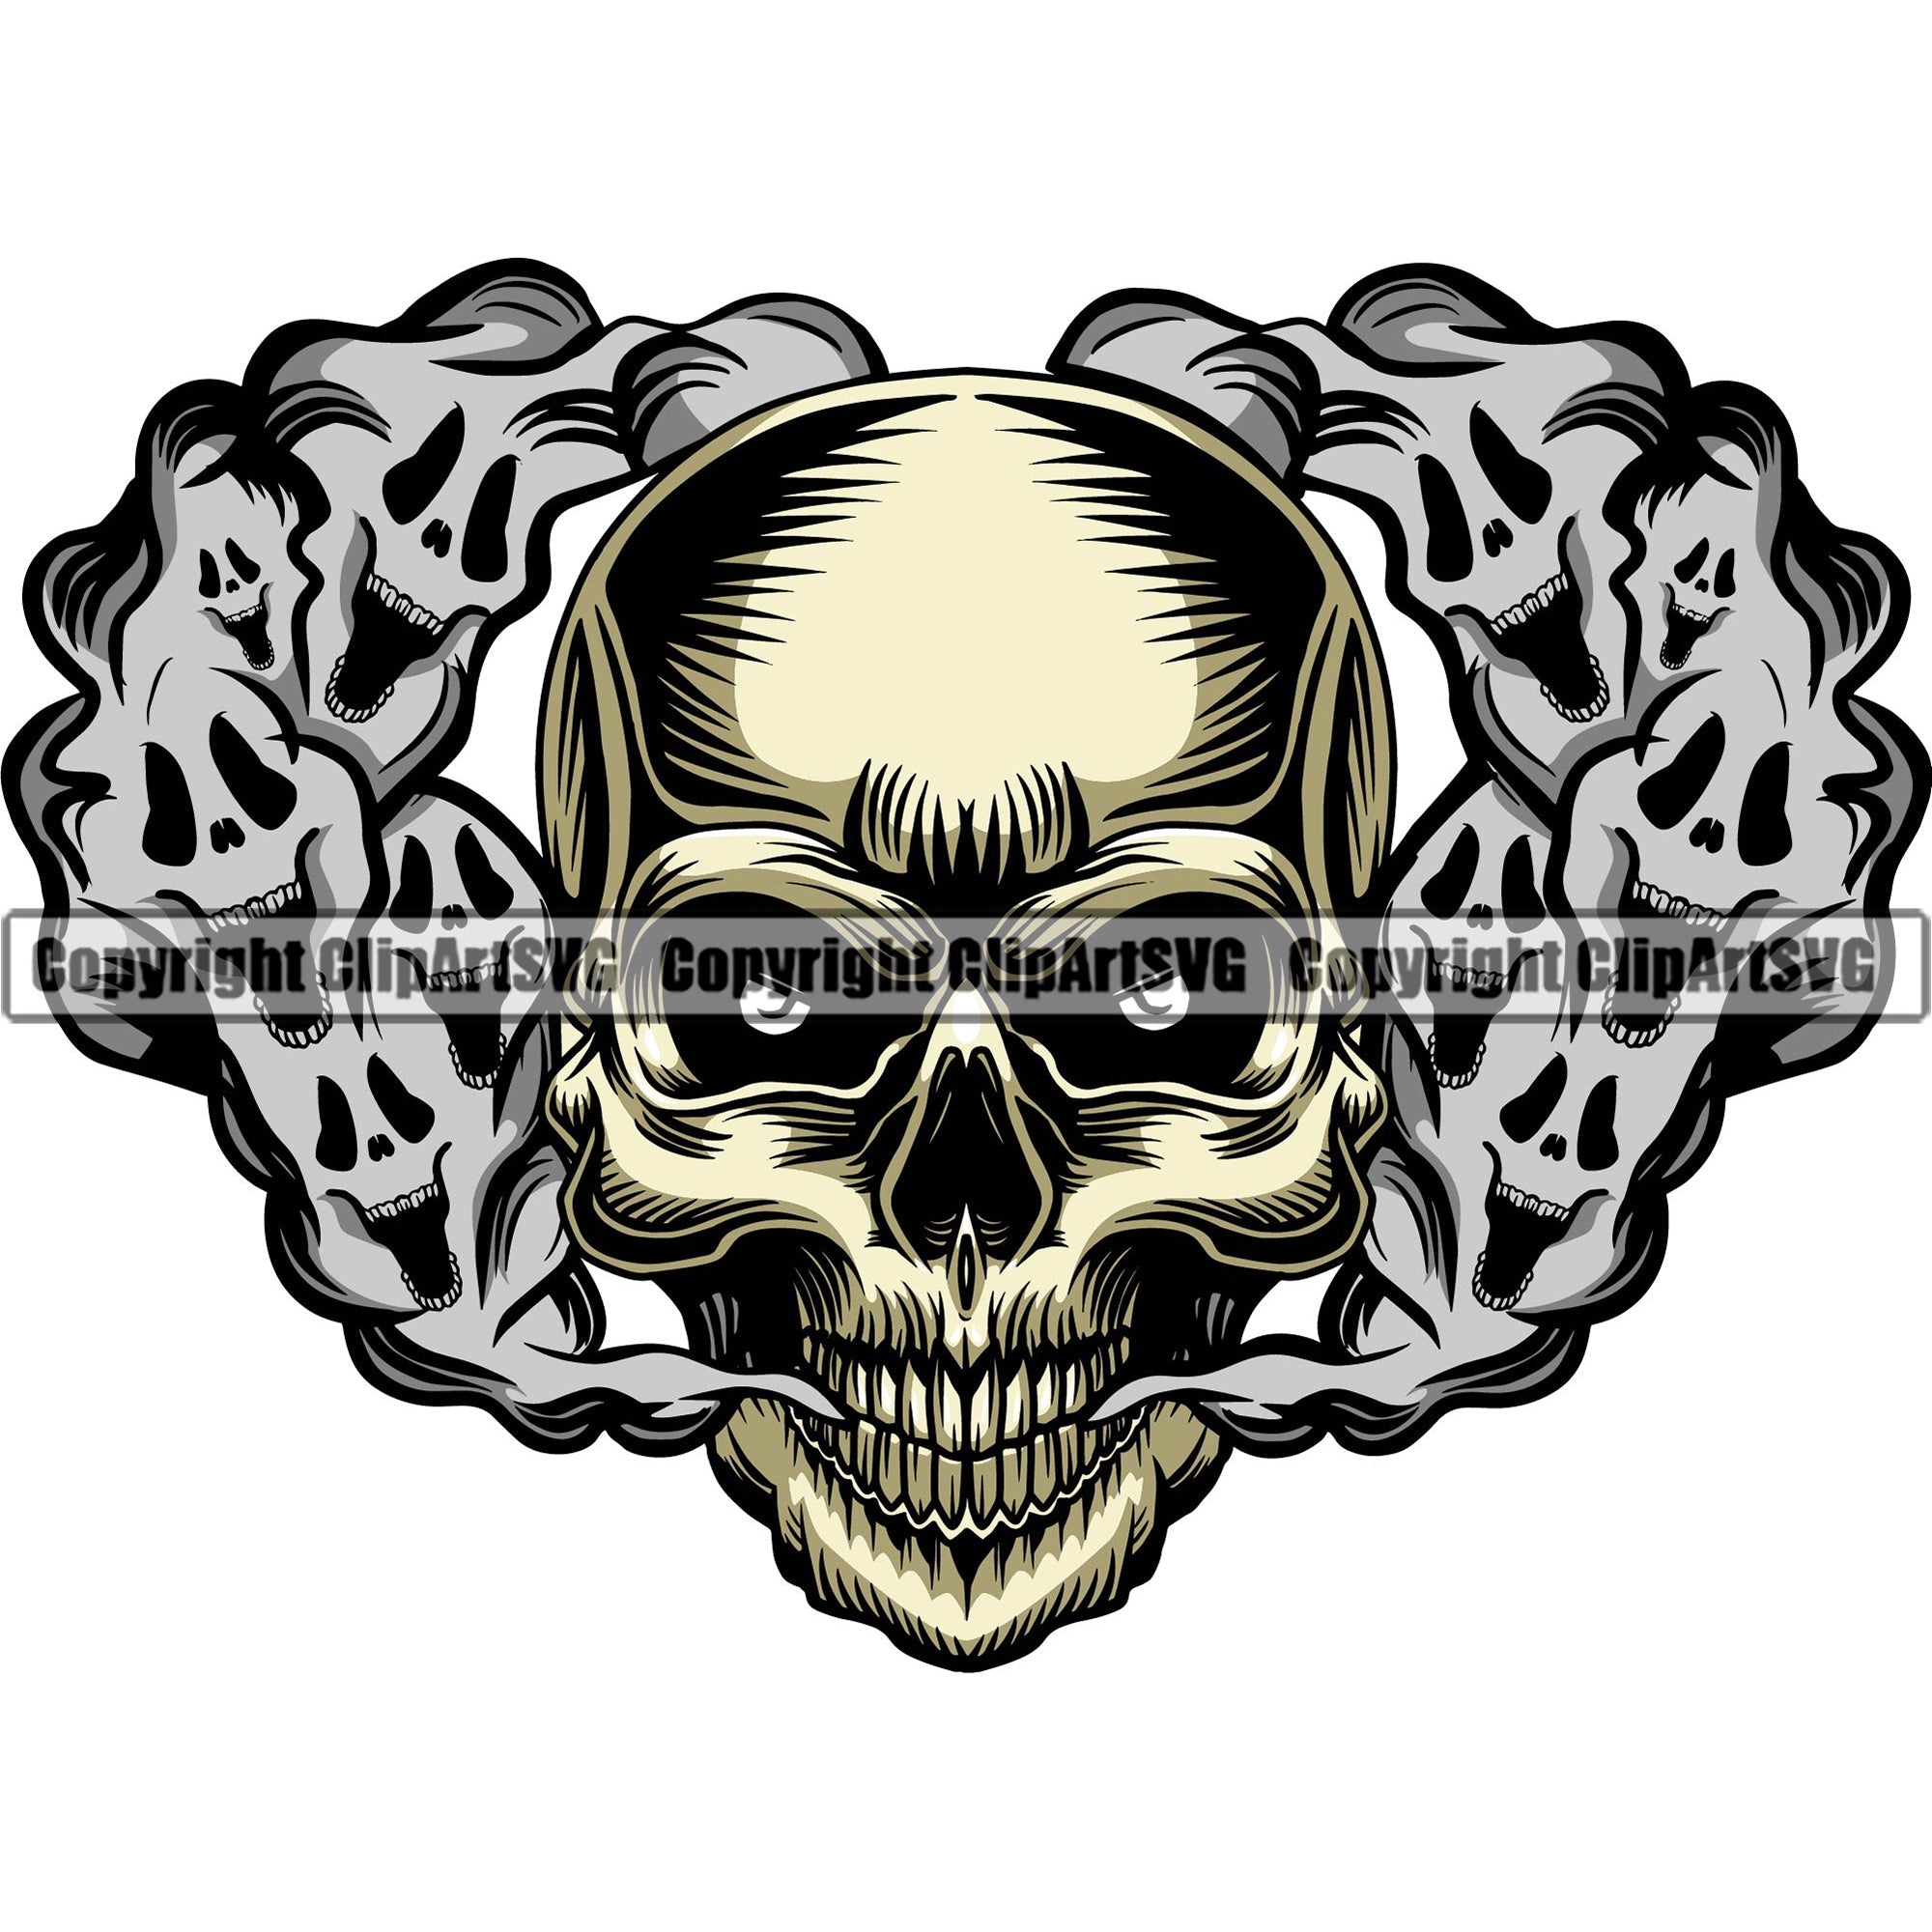 Scary Skull Skeleton Head Horror Evil Tattoo Smoking Mouth Closed Have ...